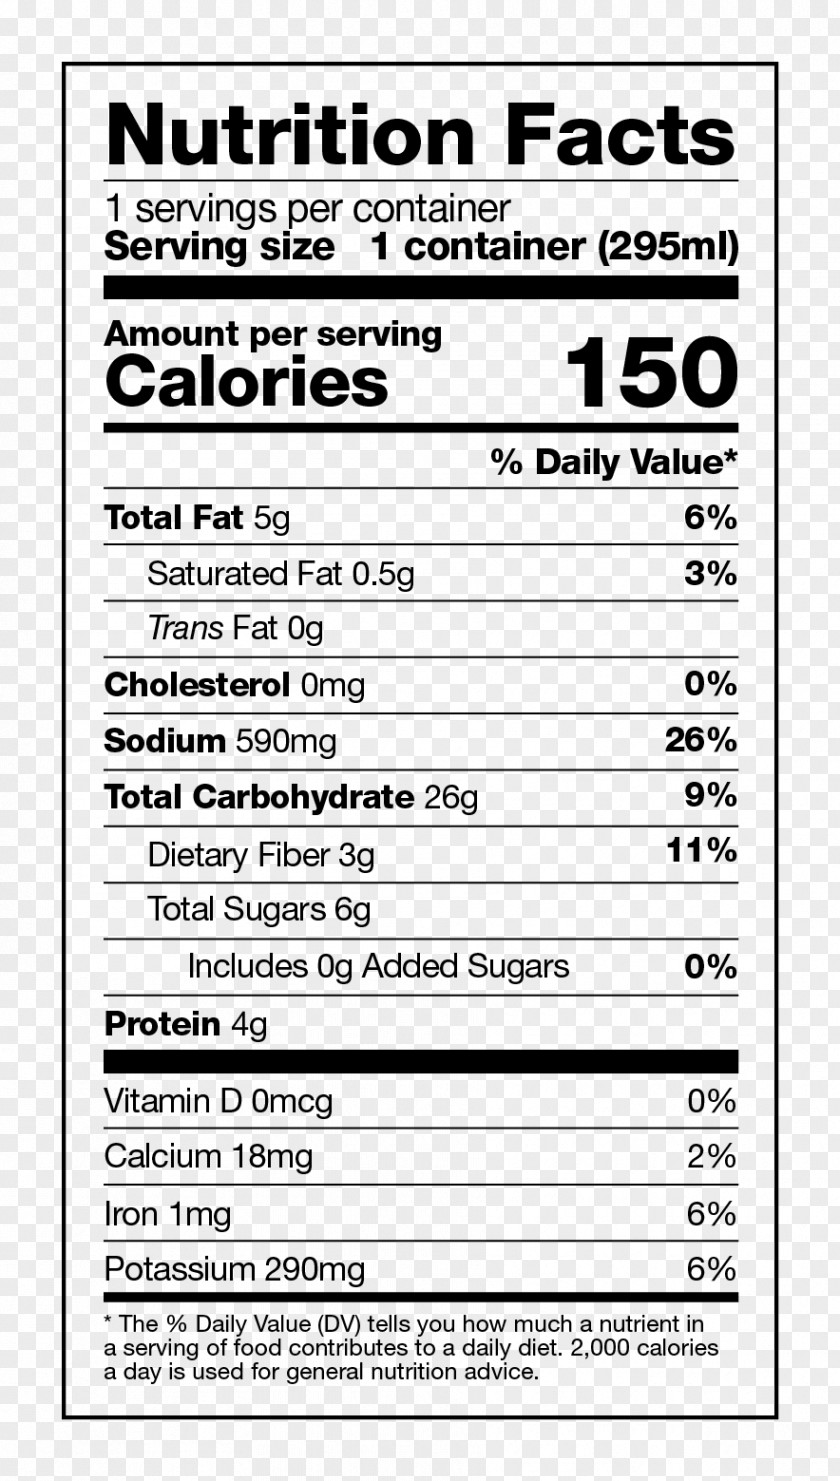 Nutrition Facts Label Food And Drug Administration PNG